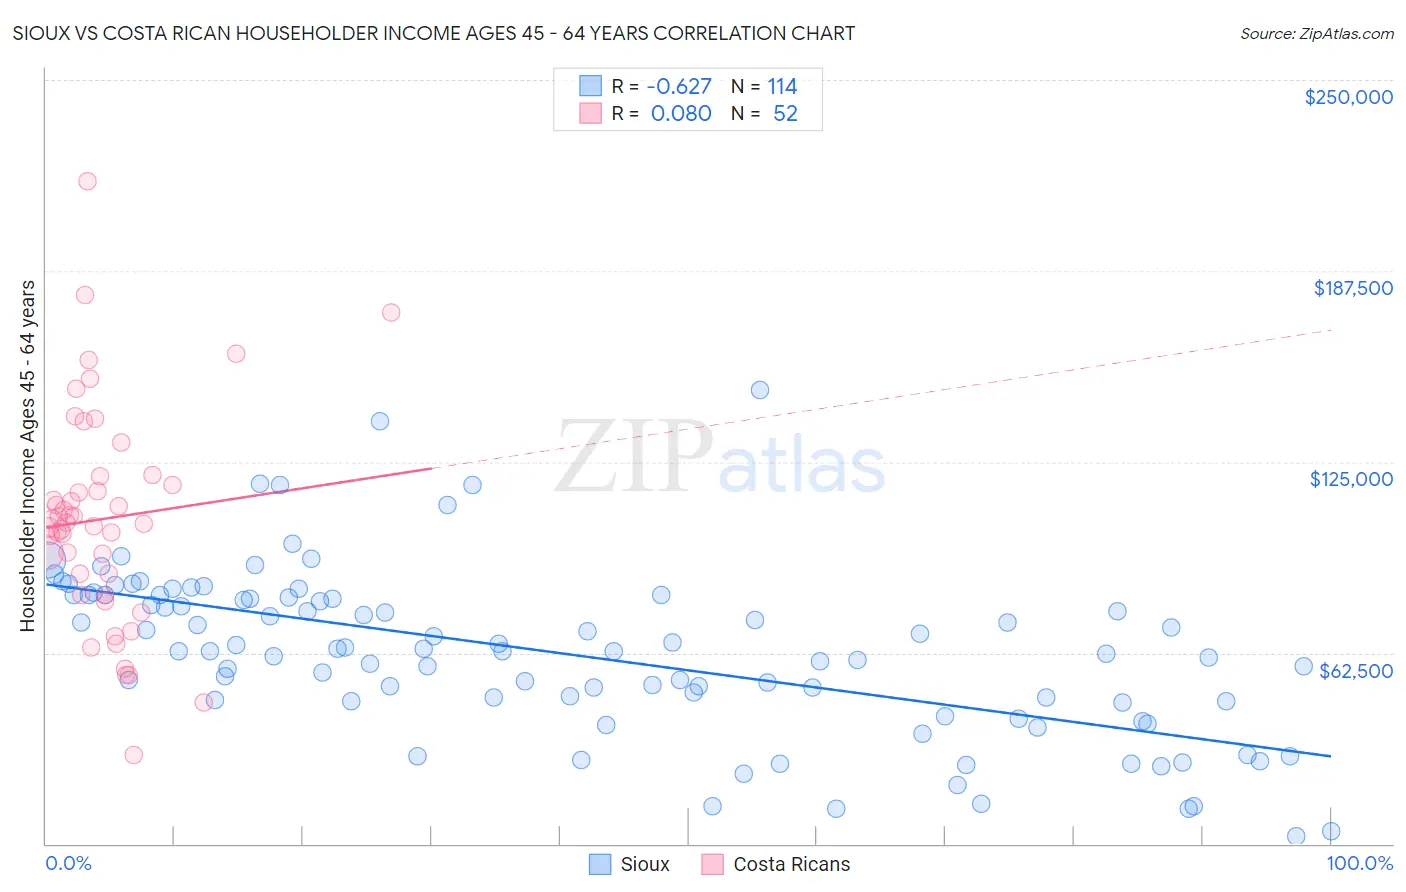 Sioux vs Costa Rican Householder Income Ages 45 - 64 years